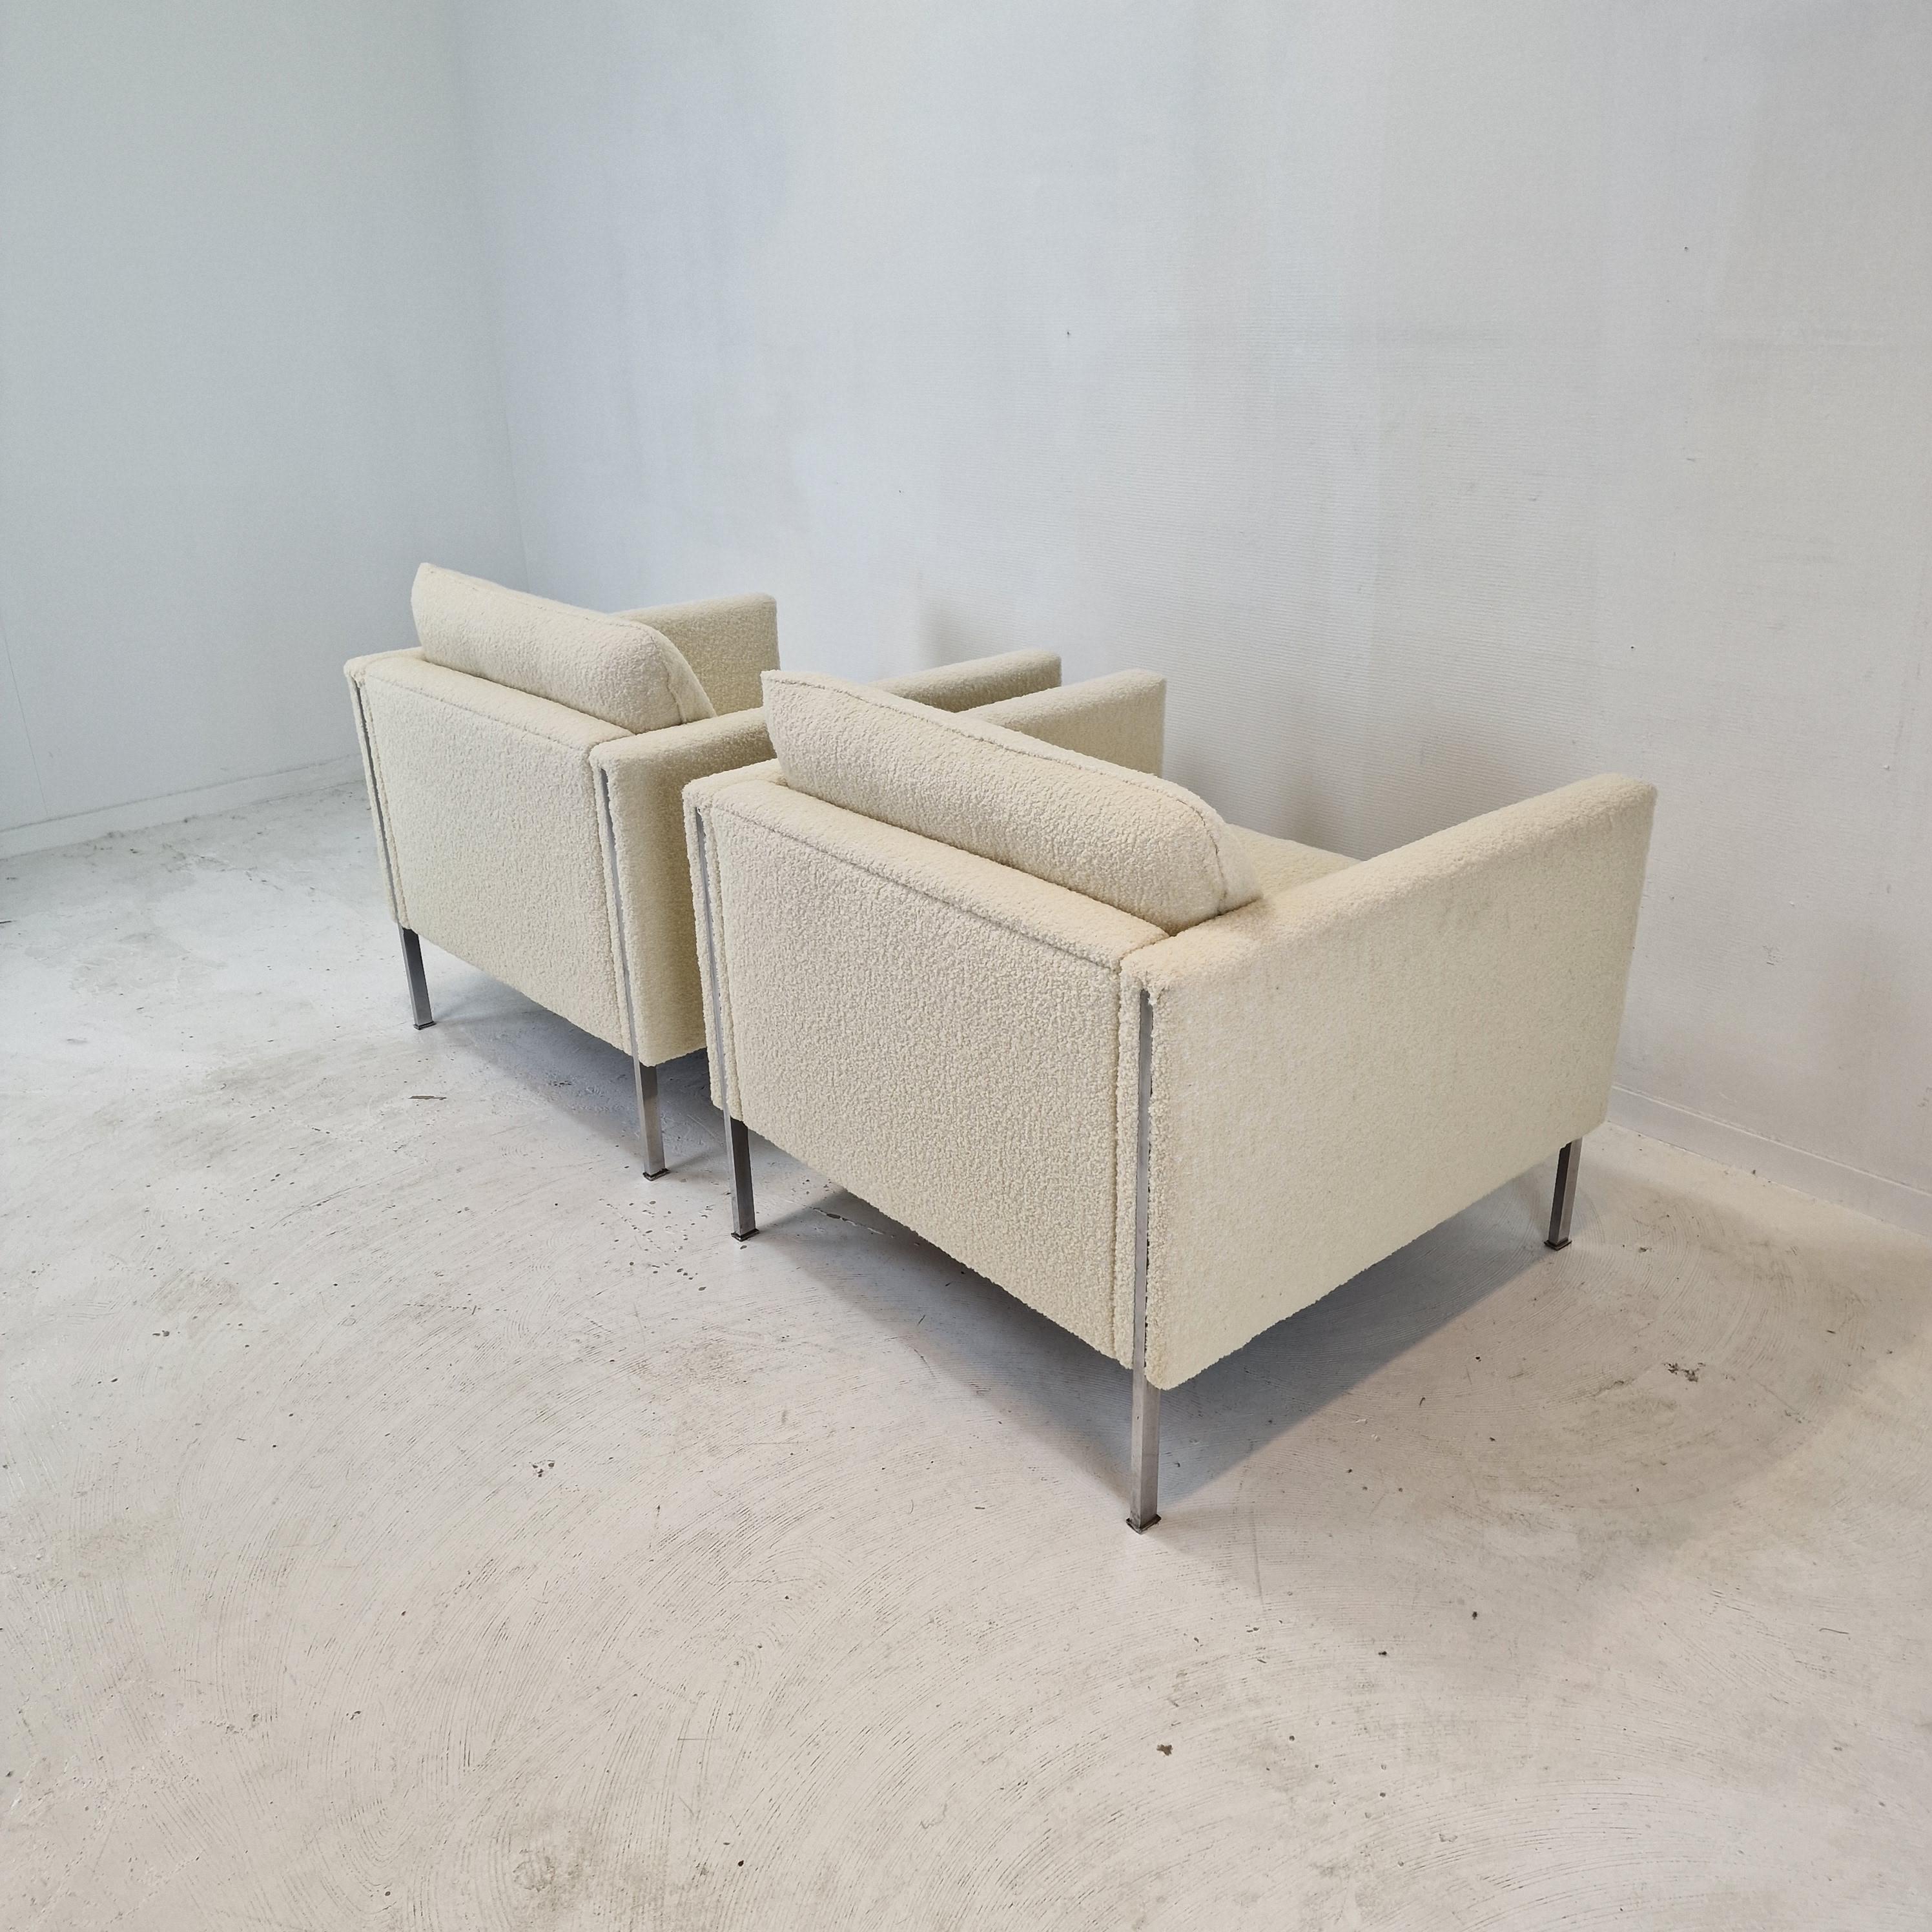 Midcentury Set of 2 Model 442 Chairs by Pierre Paulin for Artifort, 1960s For Sale 8